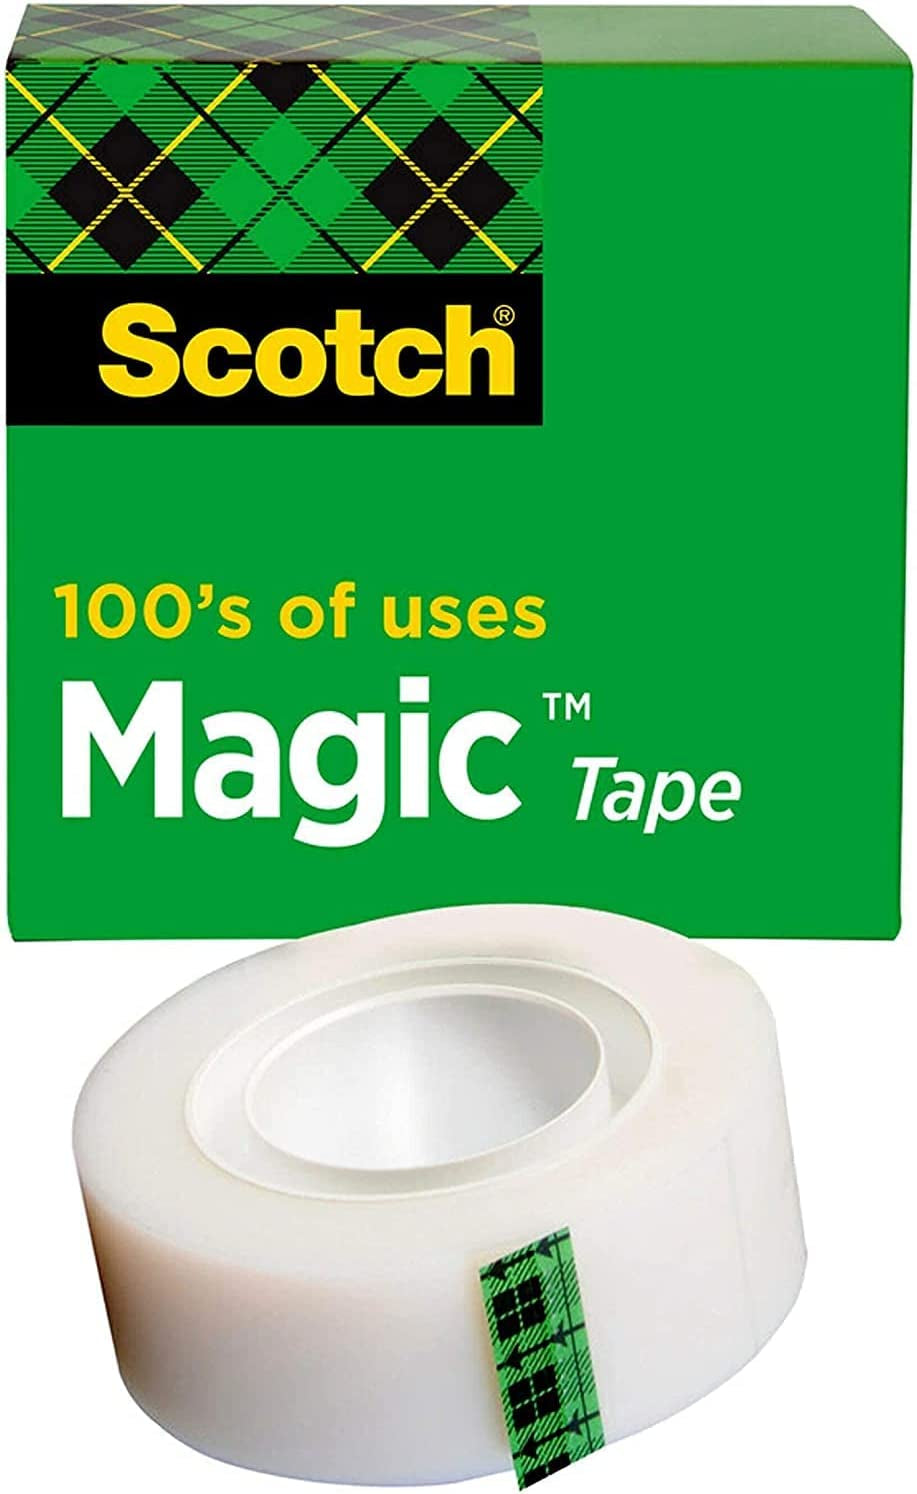 secretgreen.com.au, Magic Tape, 1 Roll, Numerous Applications, Invisible, Engineered for Repairing, 19Mm X 32.9M, Boxed (T9641810)